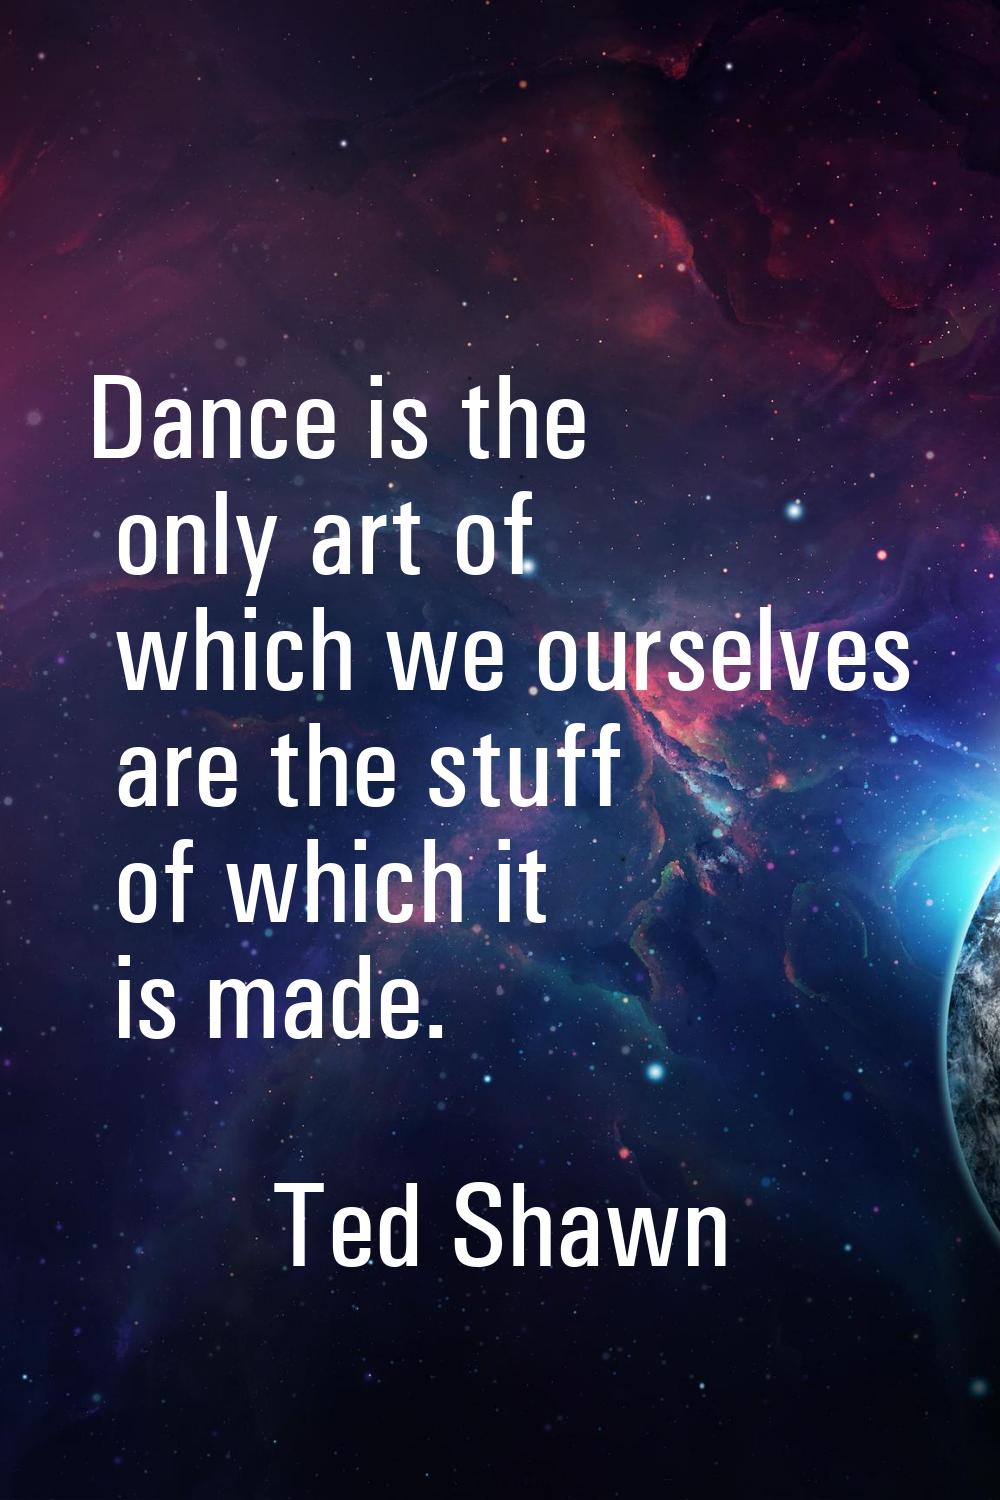 Dance is the only art of which we ourselves are the stuff of which it is made.